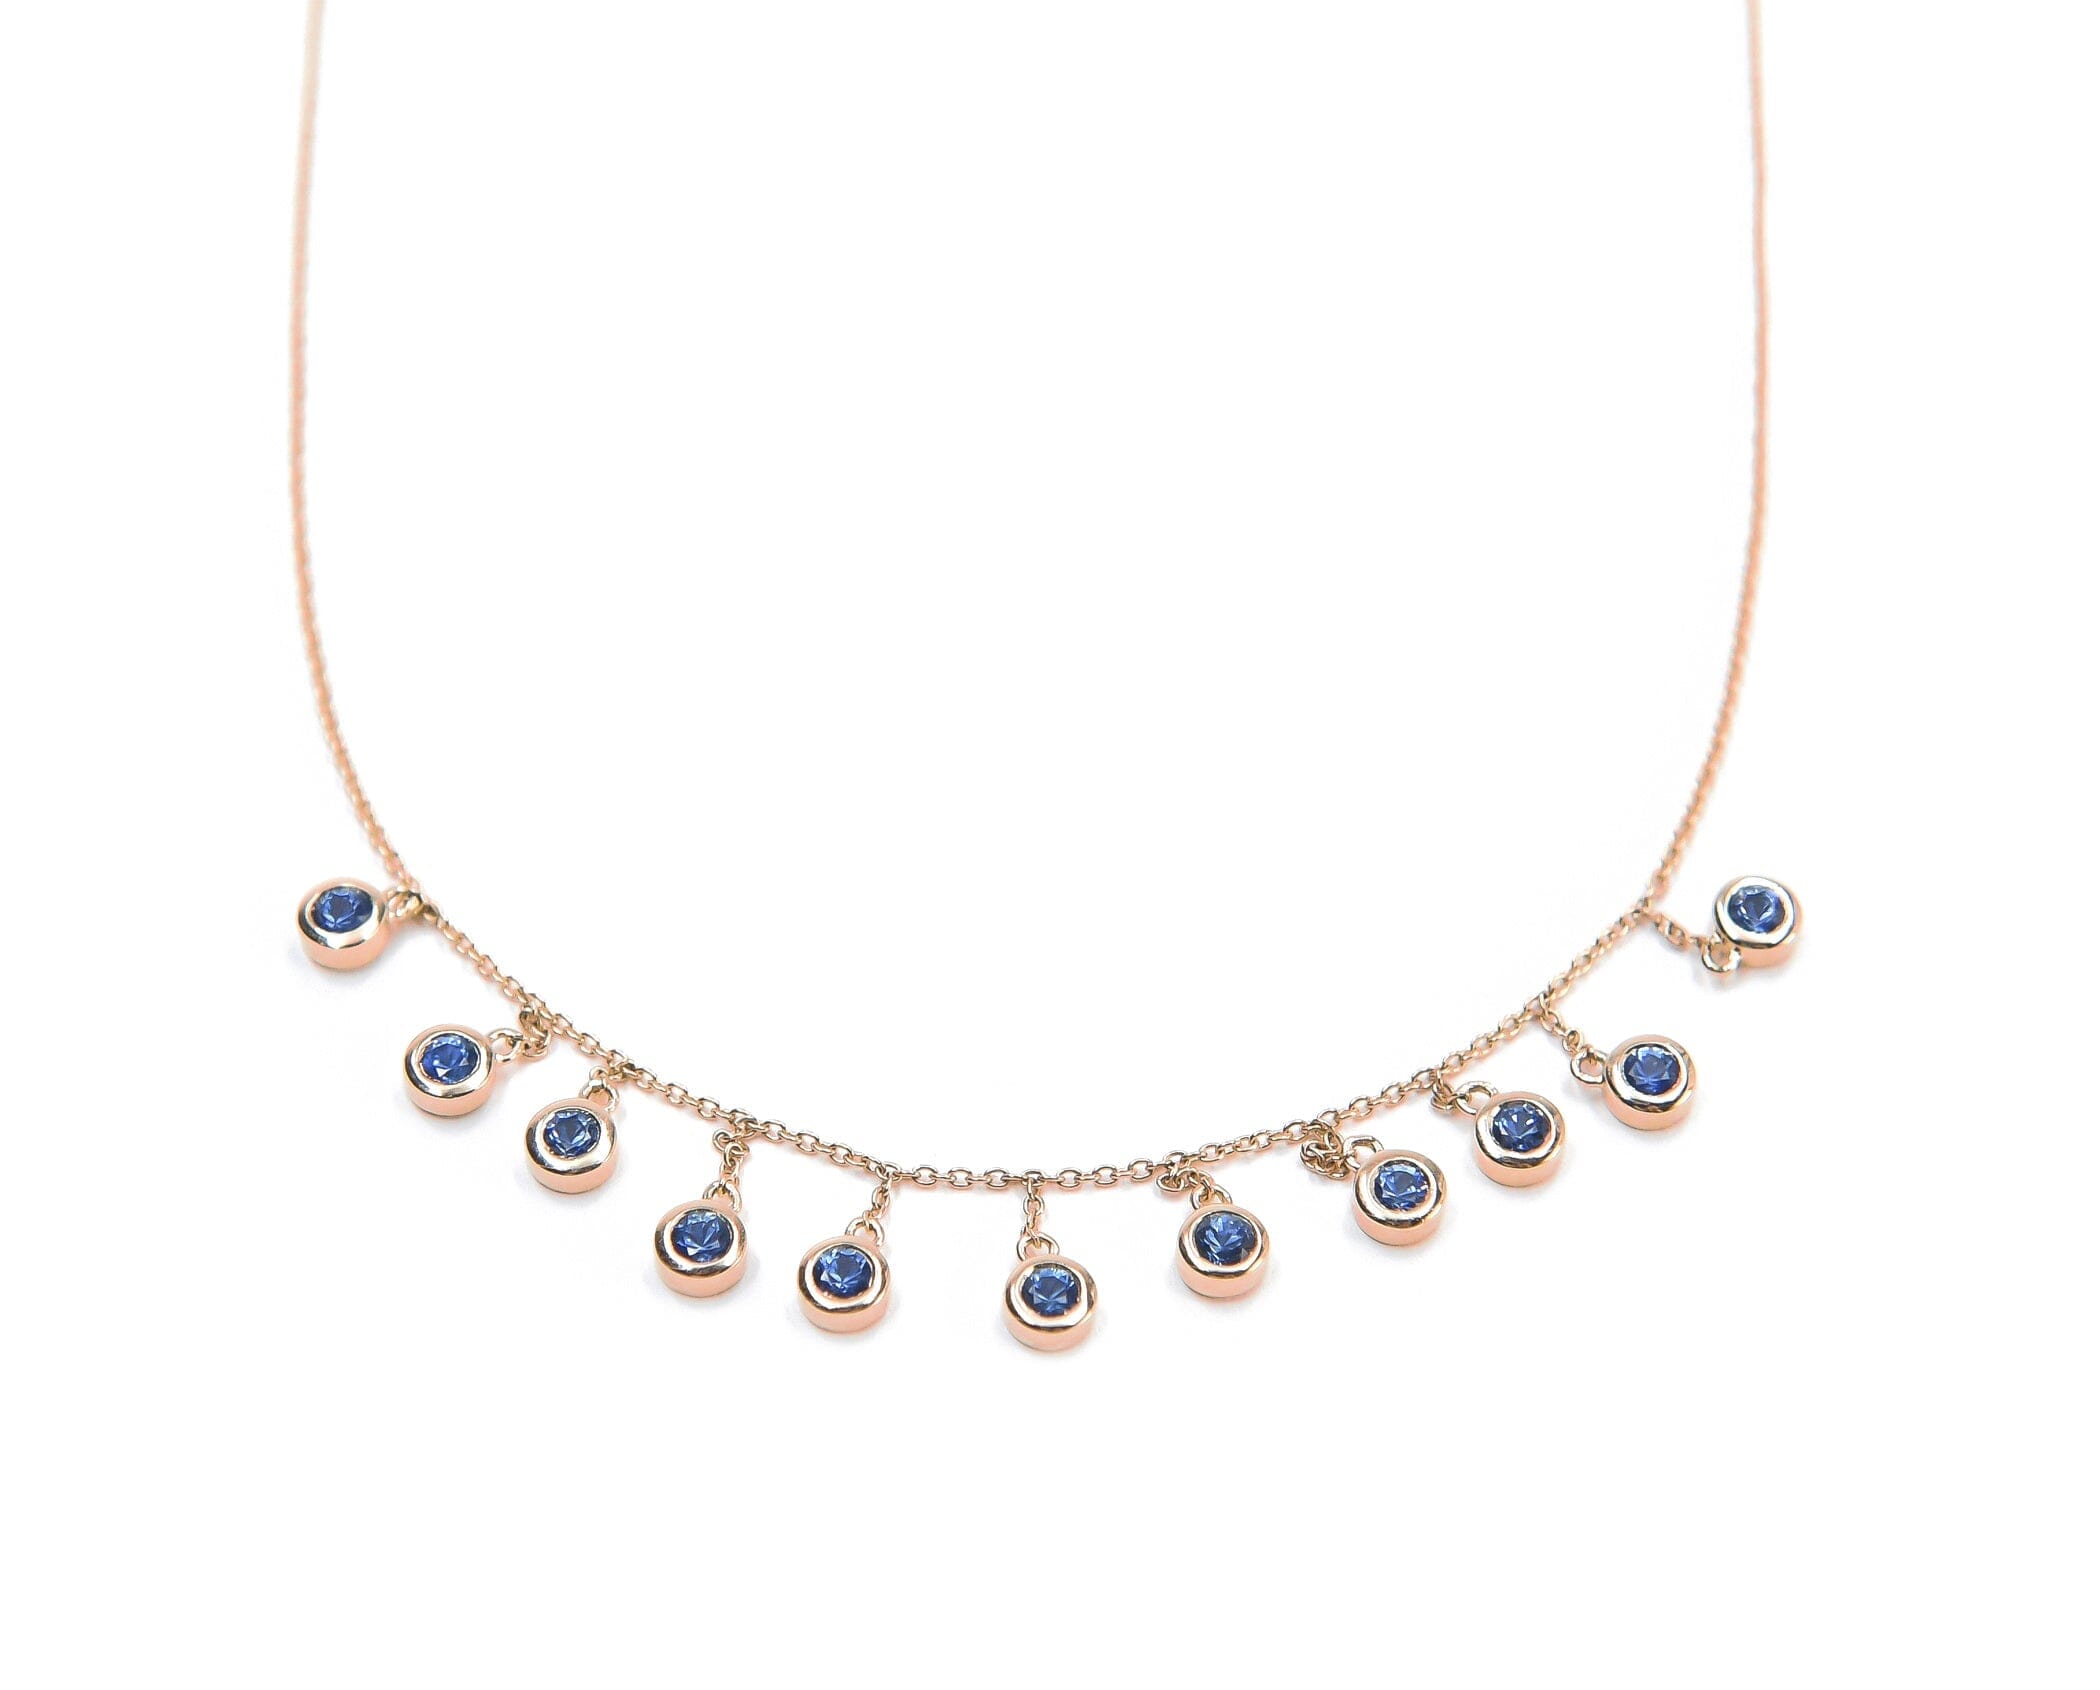 Droplet Necklace Blue Sapphires BONDEYE JEWELRY ® Rose Gold 